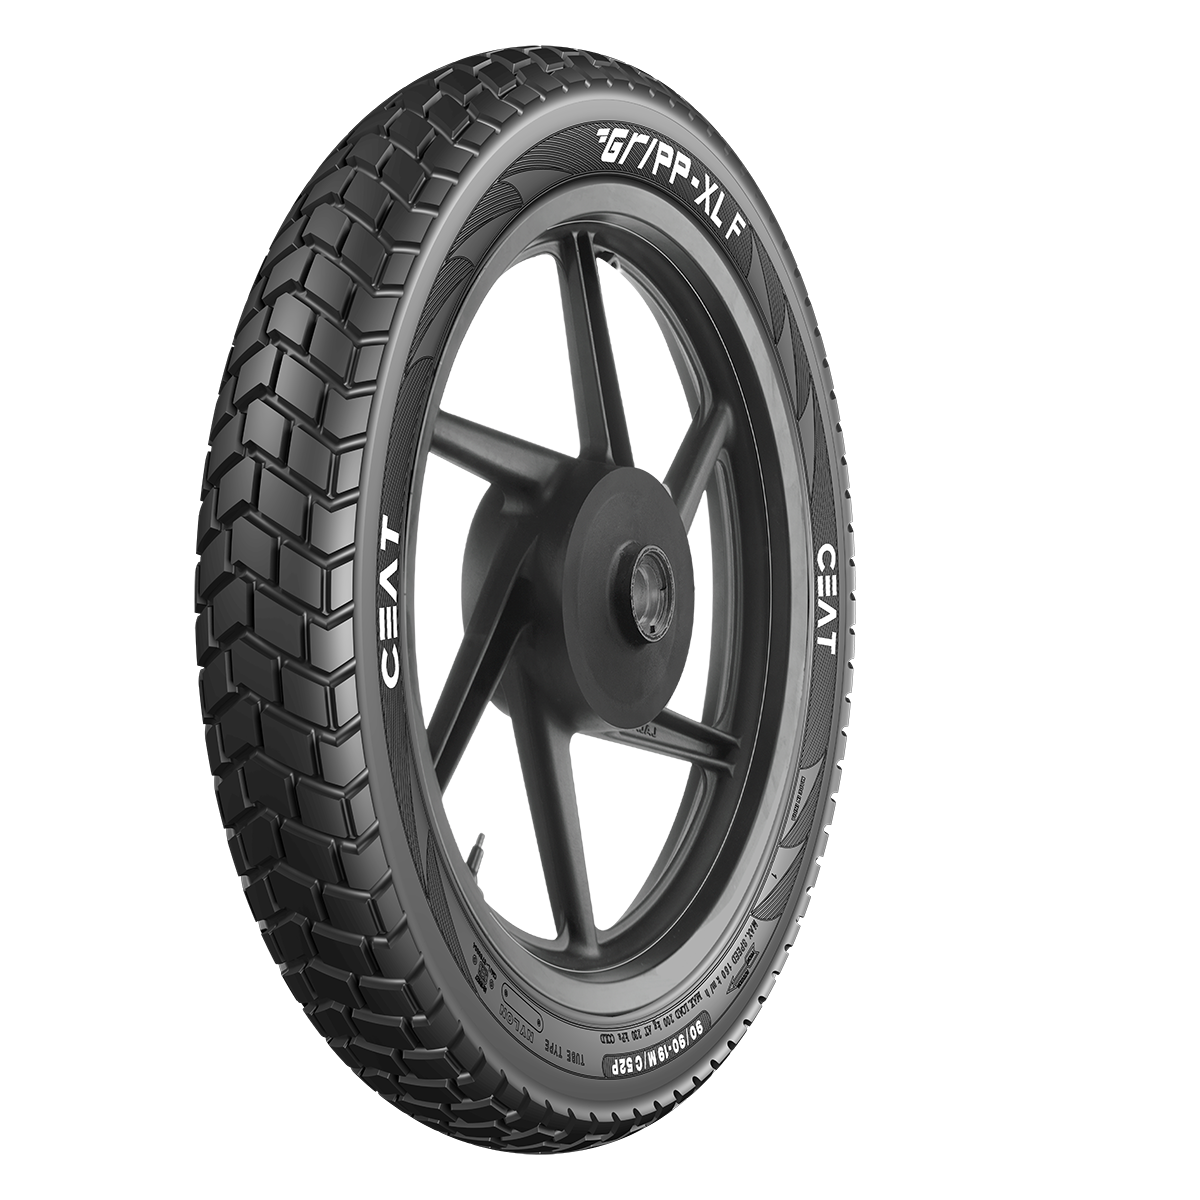 Buy Gripp Xl F 9090 19 52p Motorcycle Tyre Online By Ceat